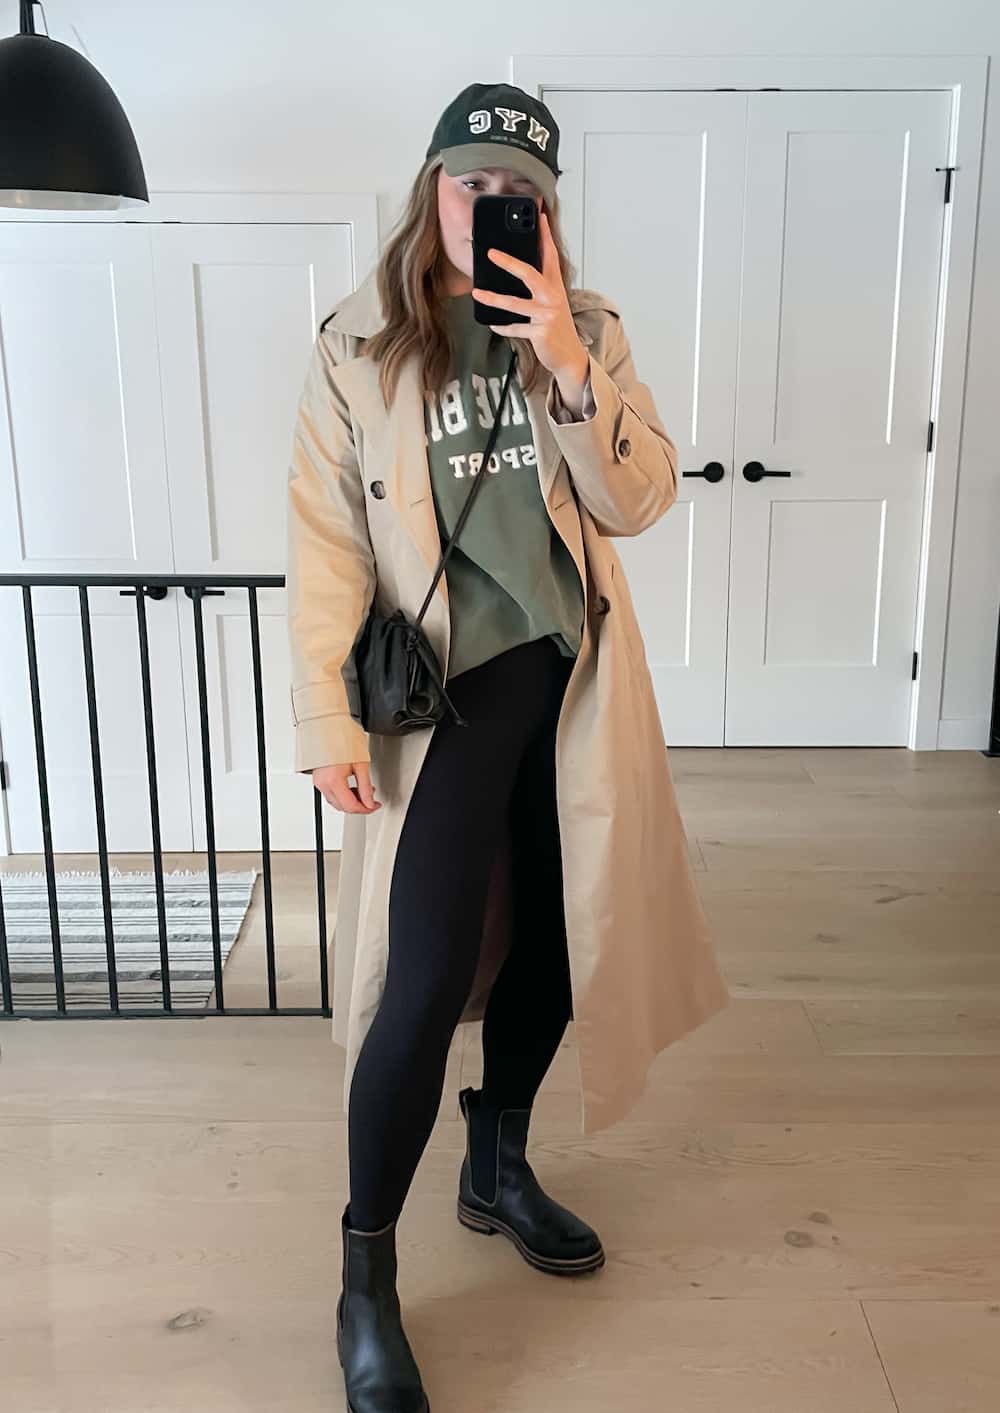 Christal wearing black leggings, a green sweatshirt, black Chelsea boots and a tan trench coat with a baseball cap.